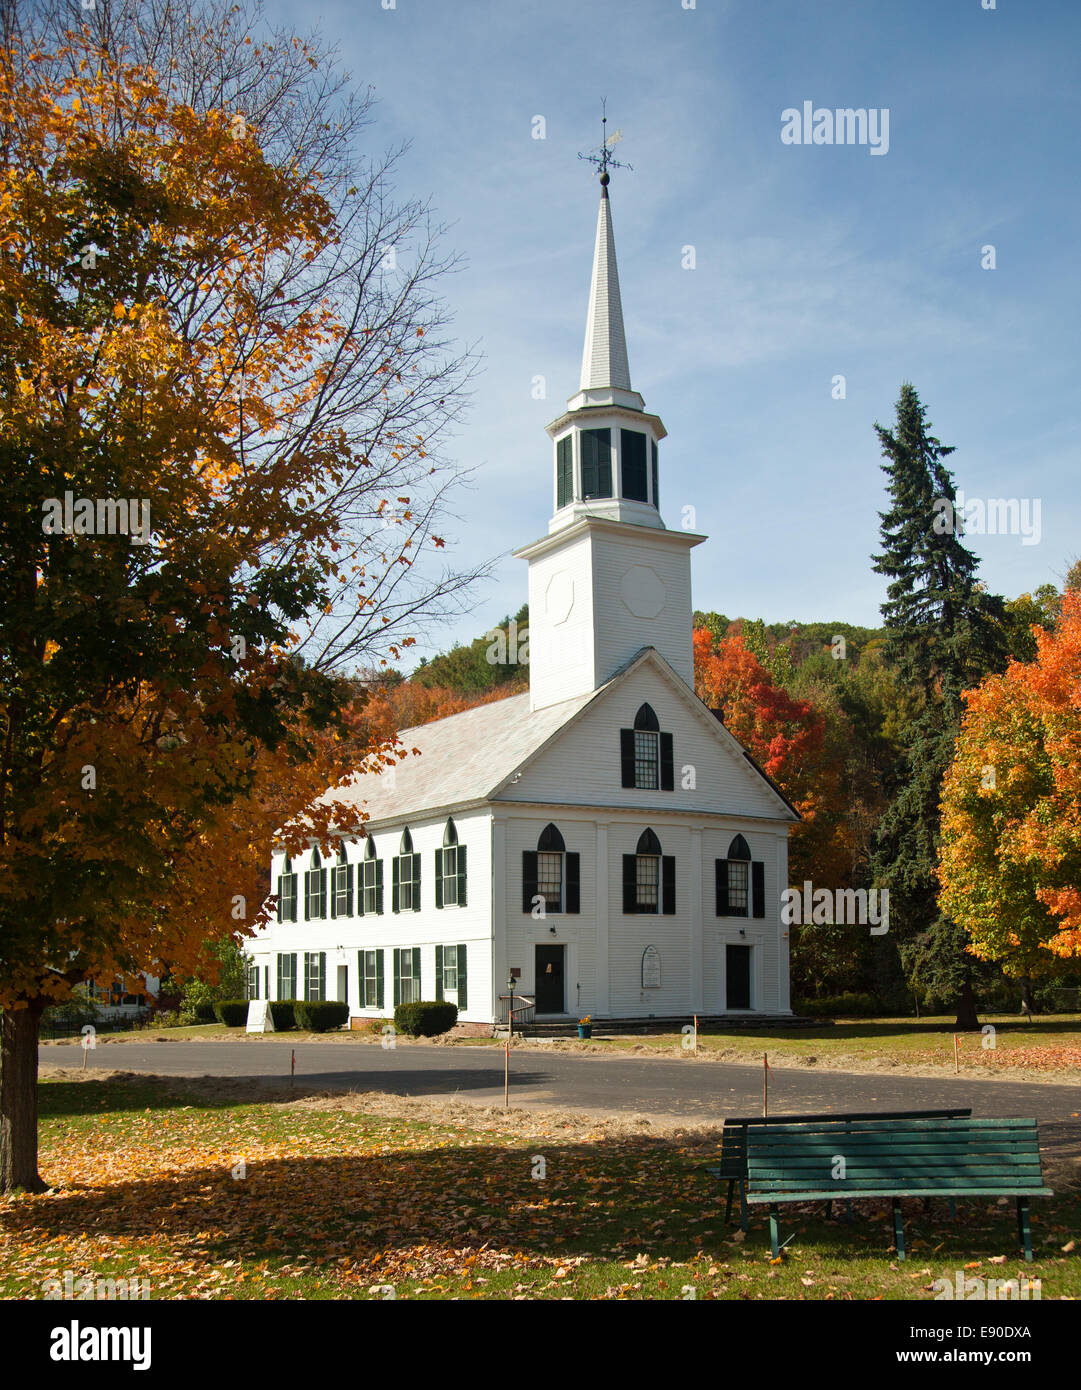 Townshend chiesa in autunno Foto Stock